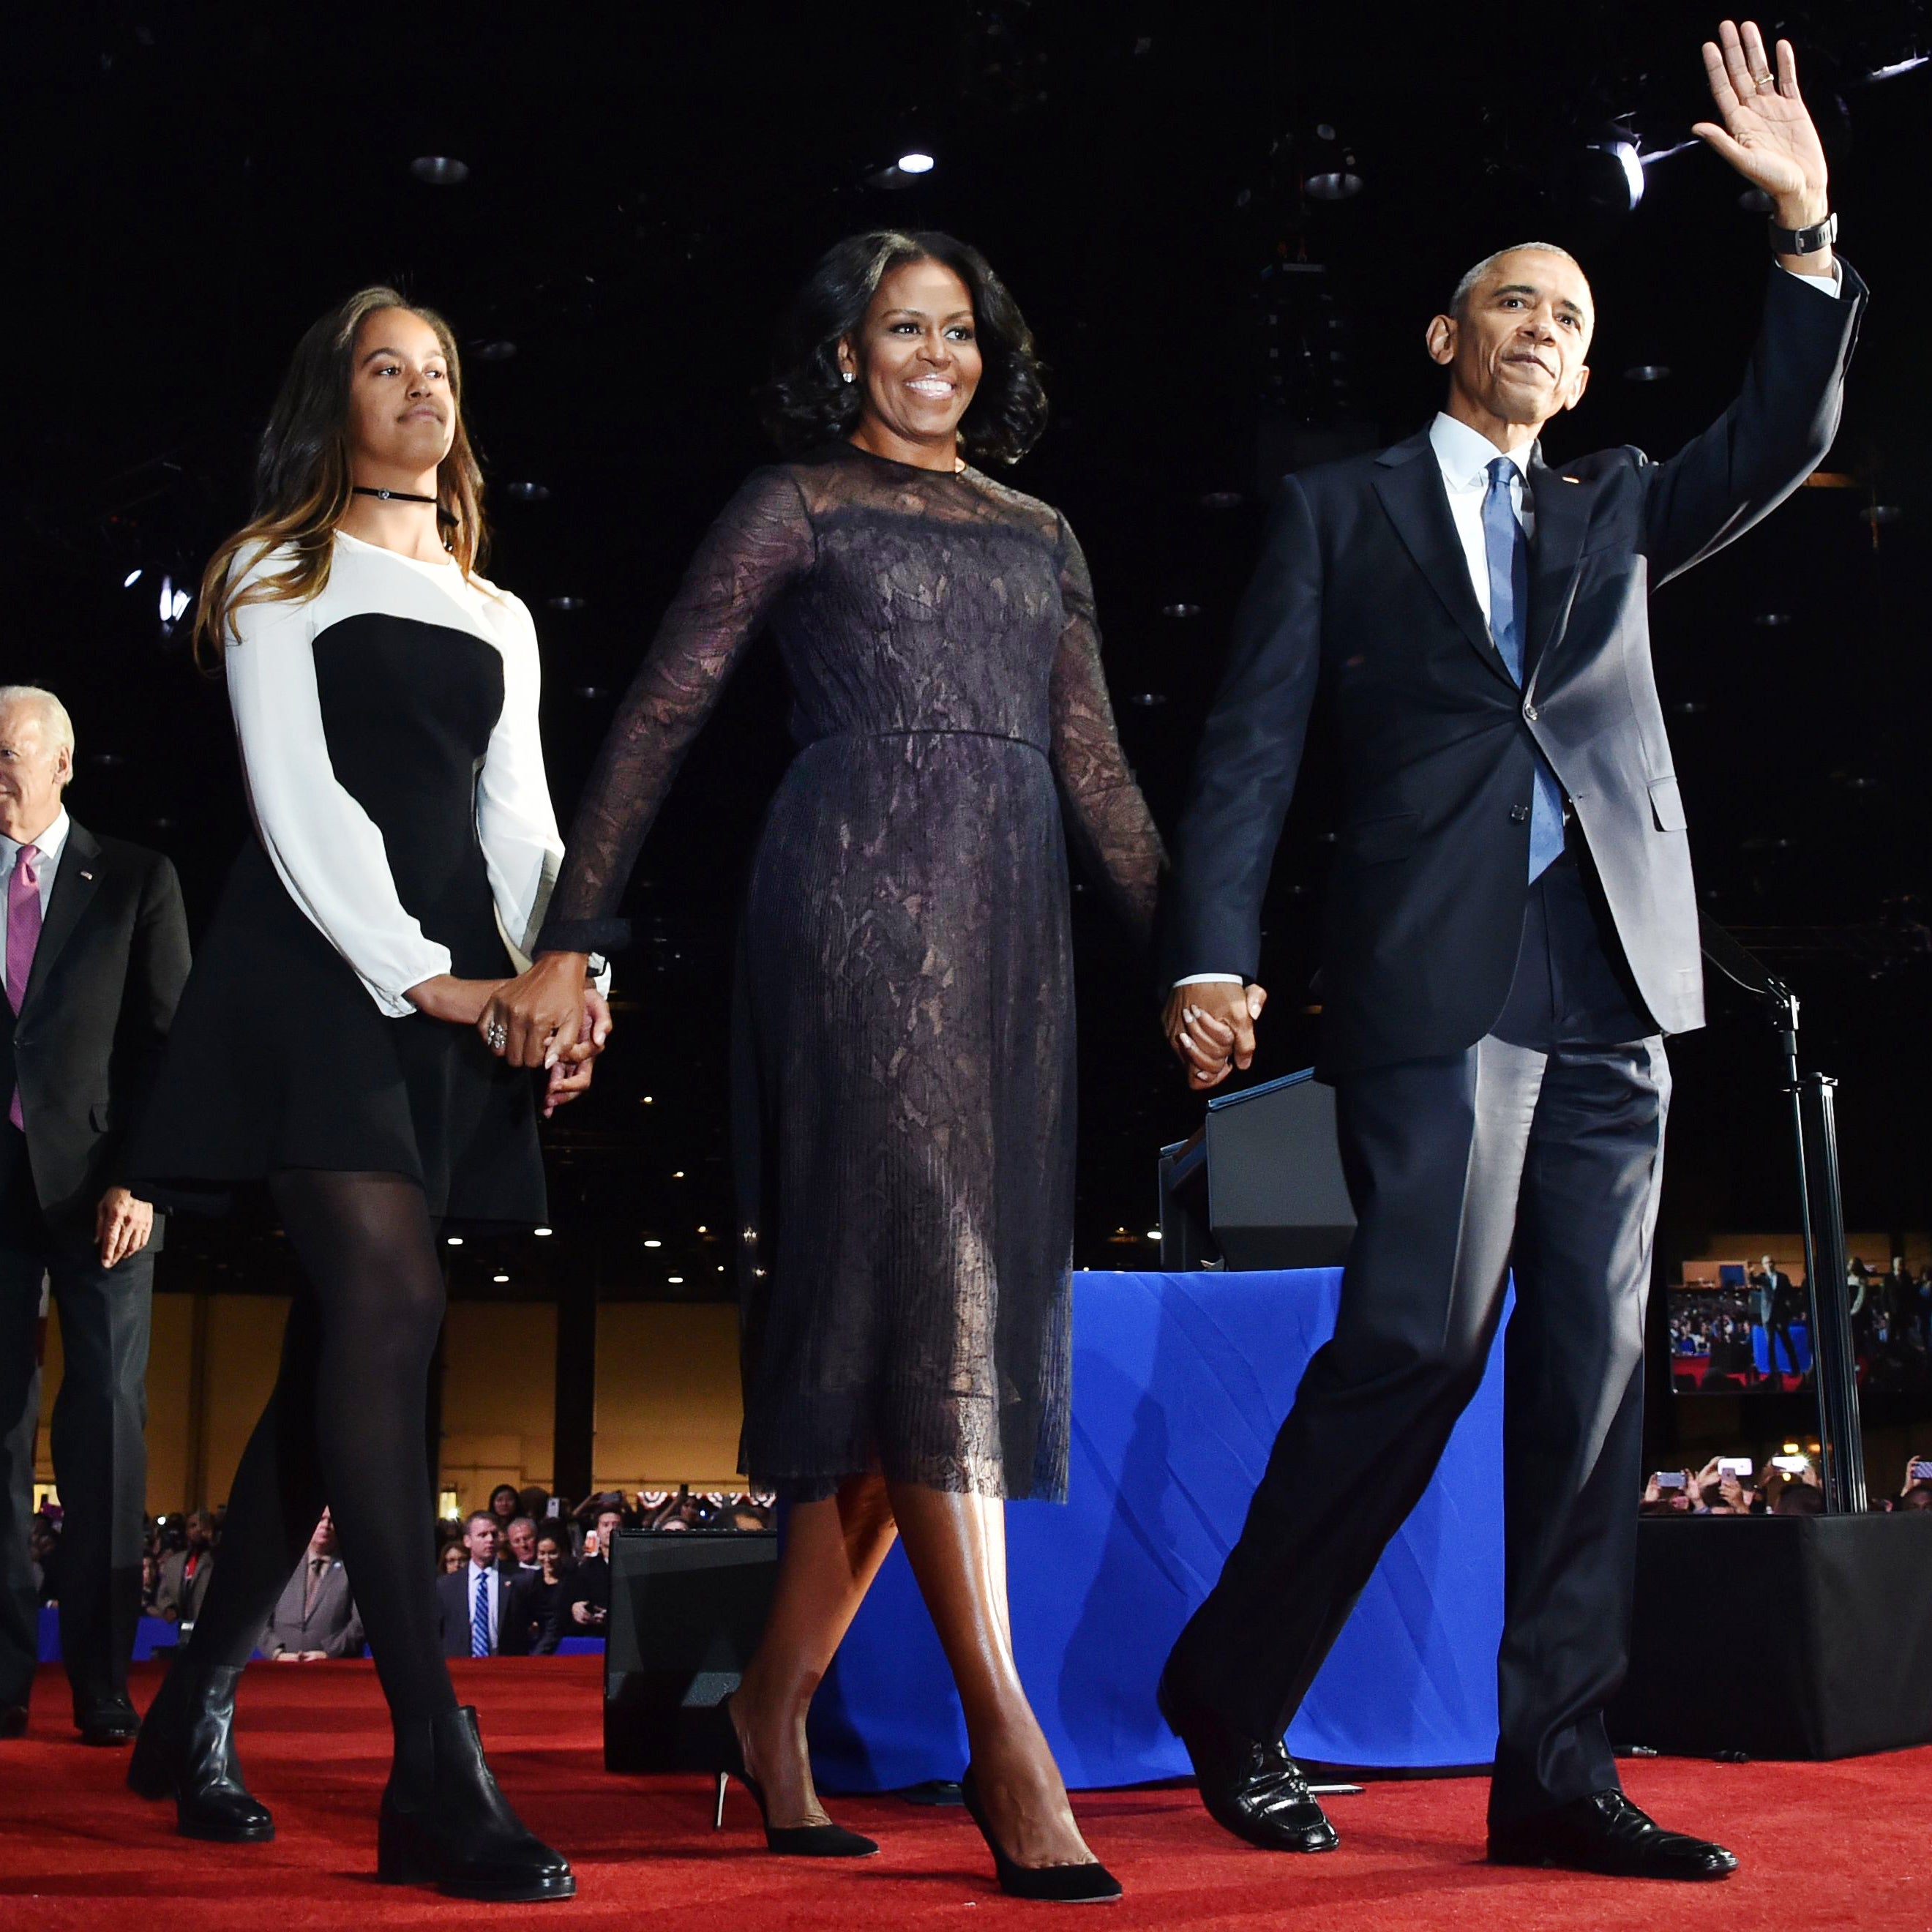 Michelle Obama's Dress At The President's Farewell Speech Had a Very Special Meaning
